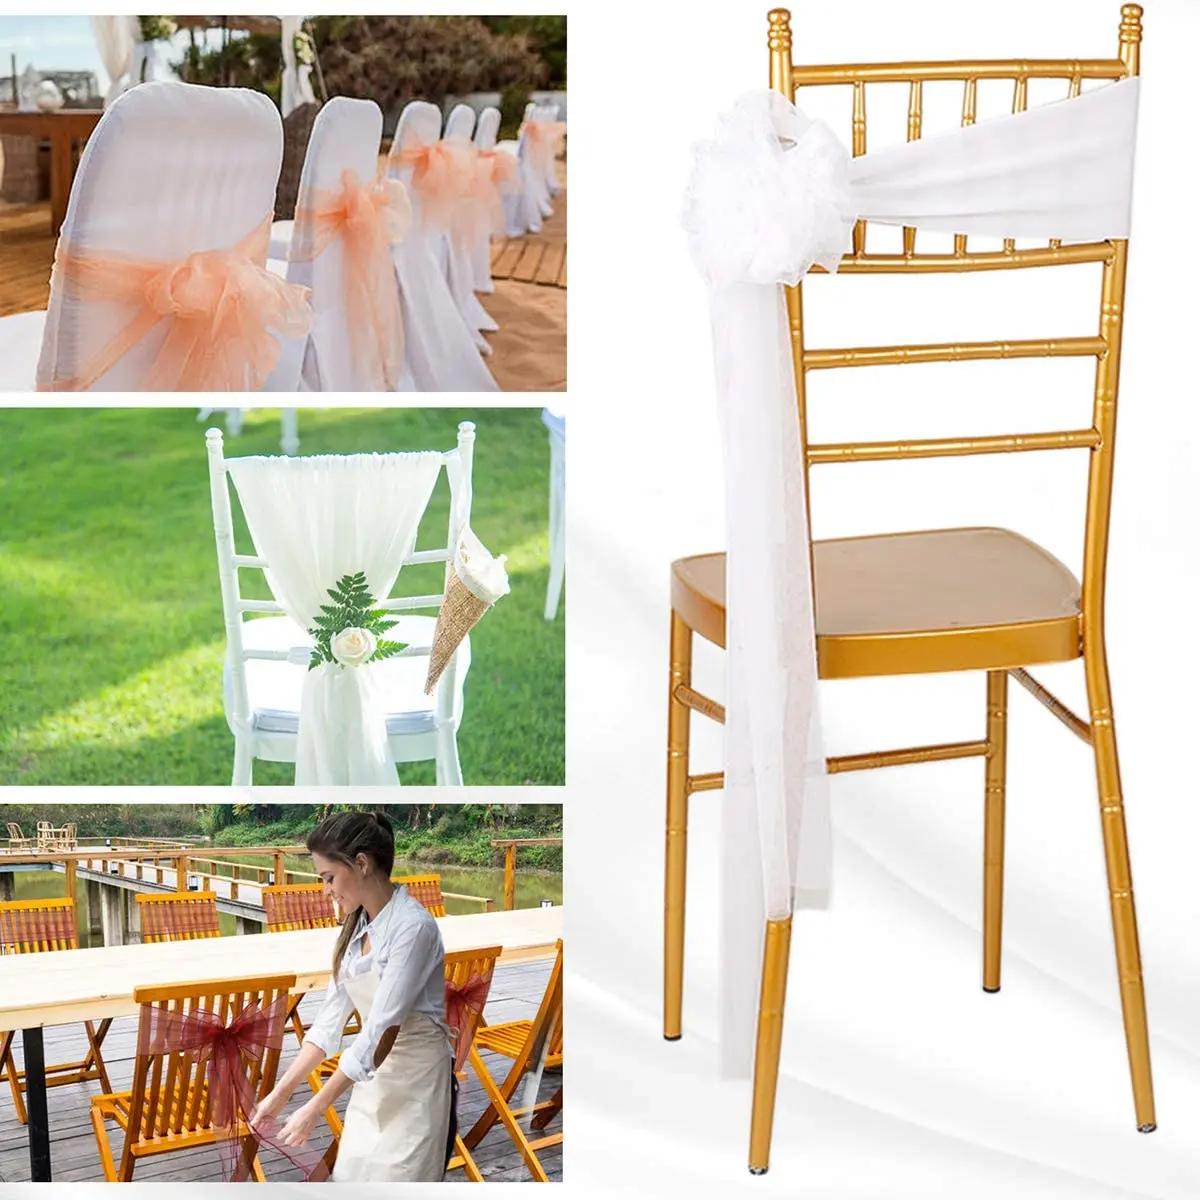 50pcs Organza Chair Sashes Chair Bows Wedding Decoration for Chair Cover Party Event Beach Wedding Decorations 18cm X 275cm images - 6